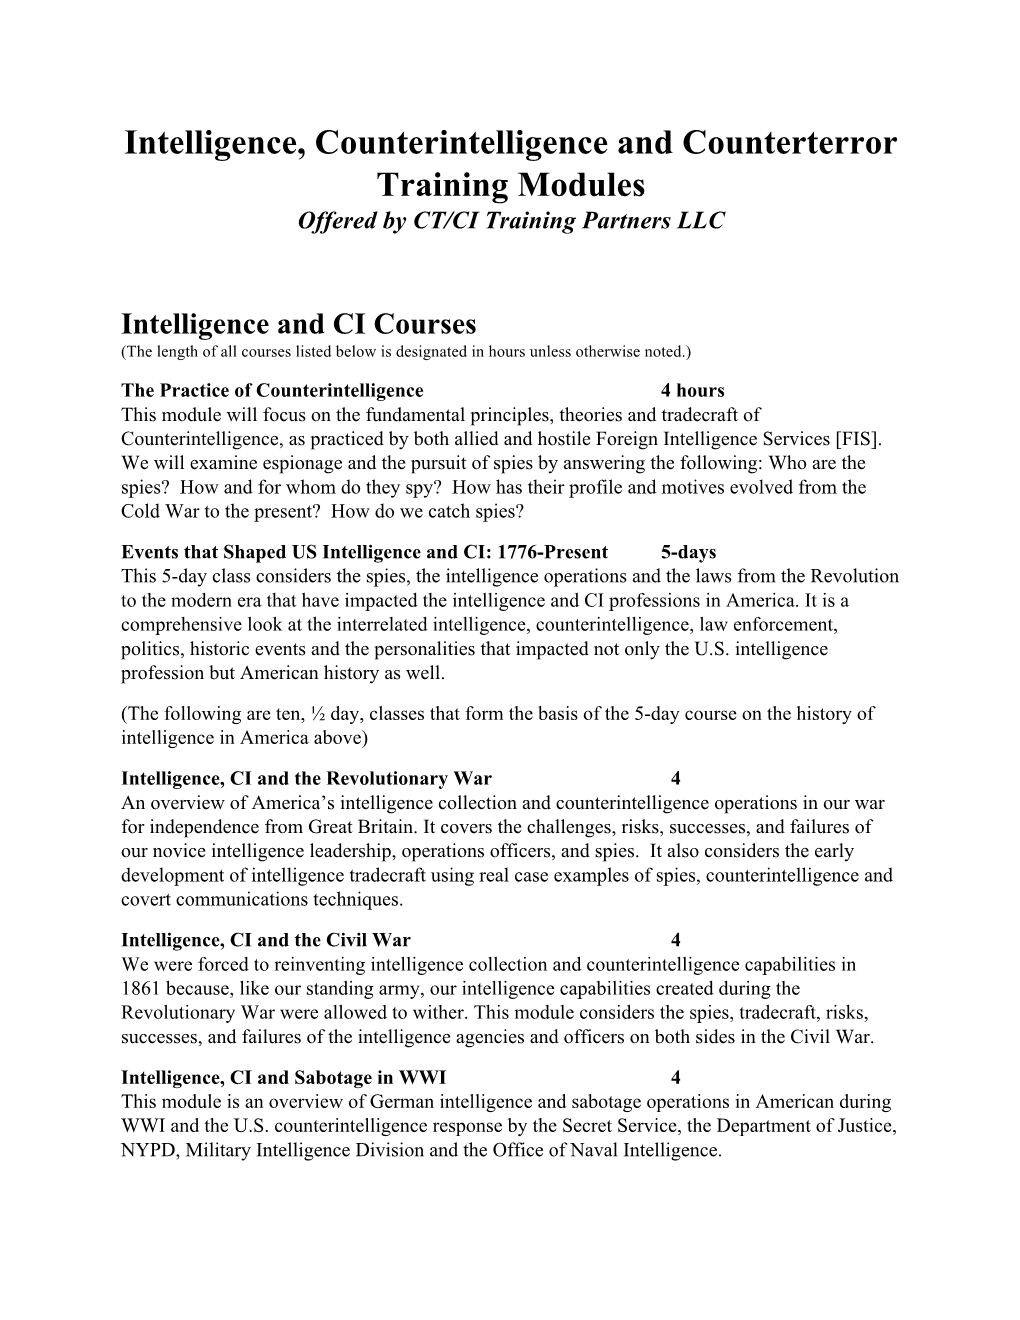 Intelligence, Counterintelligence and Counterterror Training Modules Offered by CT/CI Training Partners LLC